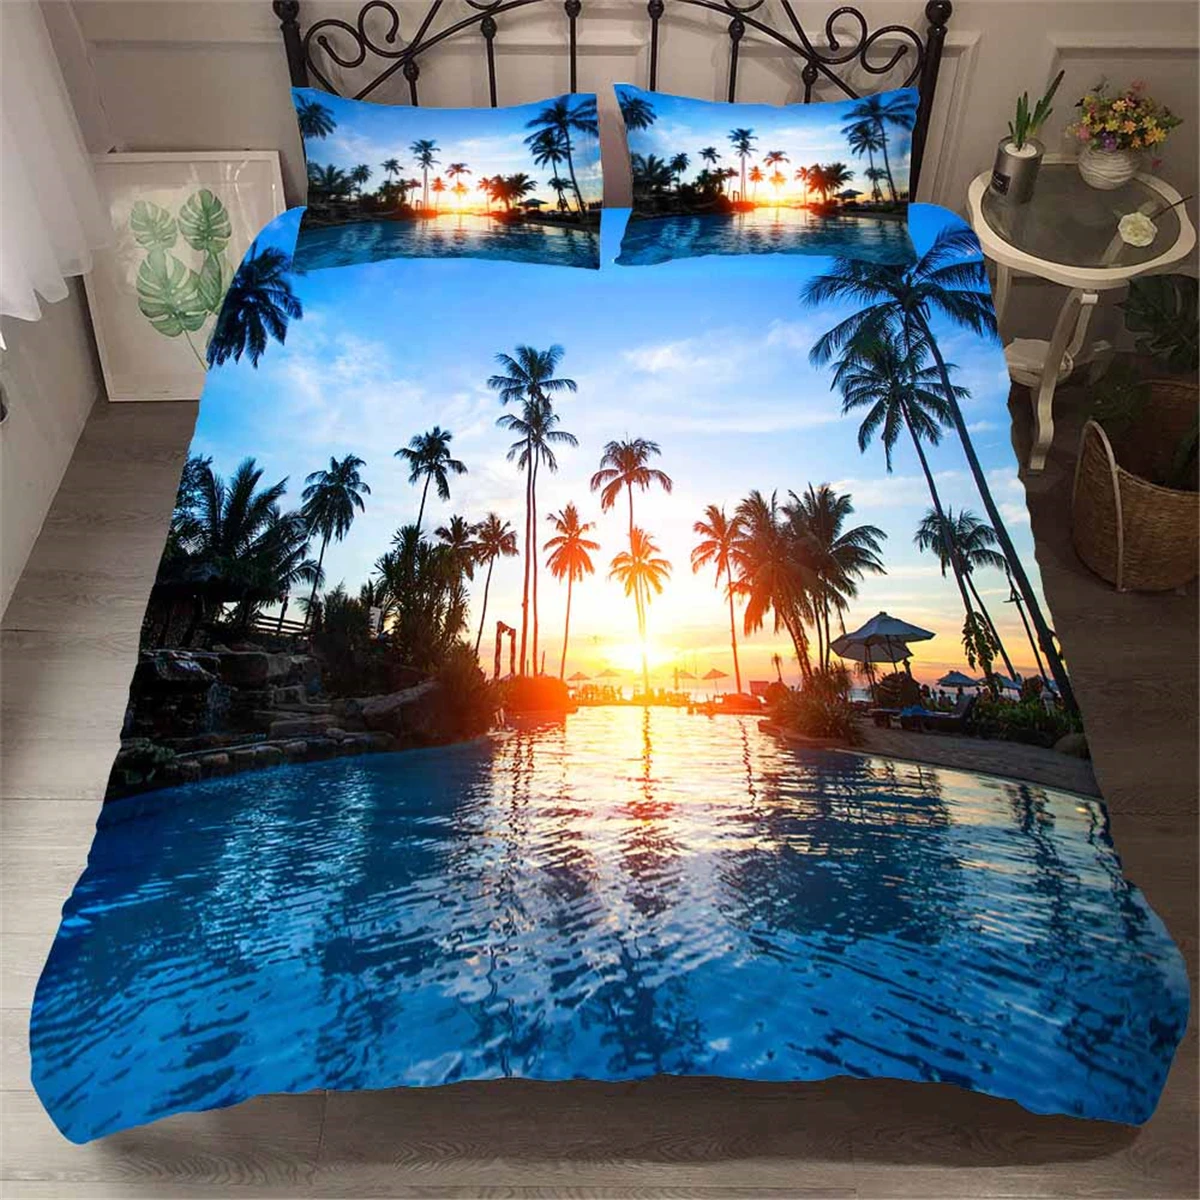 

Natural Seaside Scenery Bedding Set Sunset Beach Printed Down Quilt Cover Linen Cover Pillowcase Single Double Queen King Size